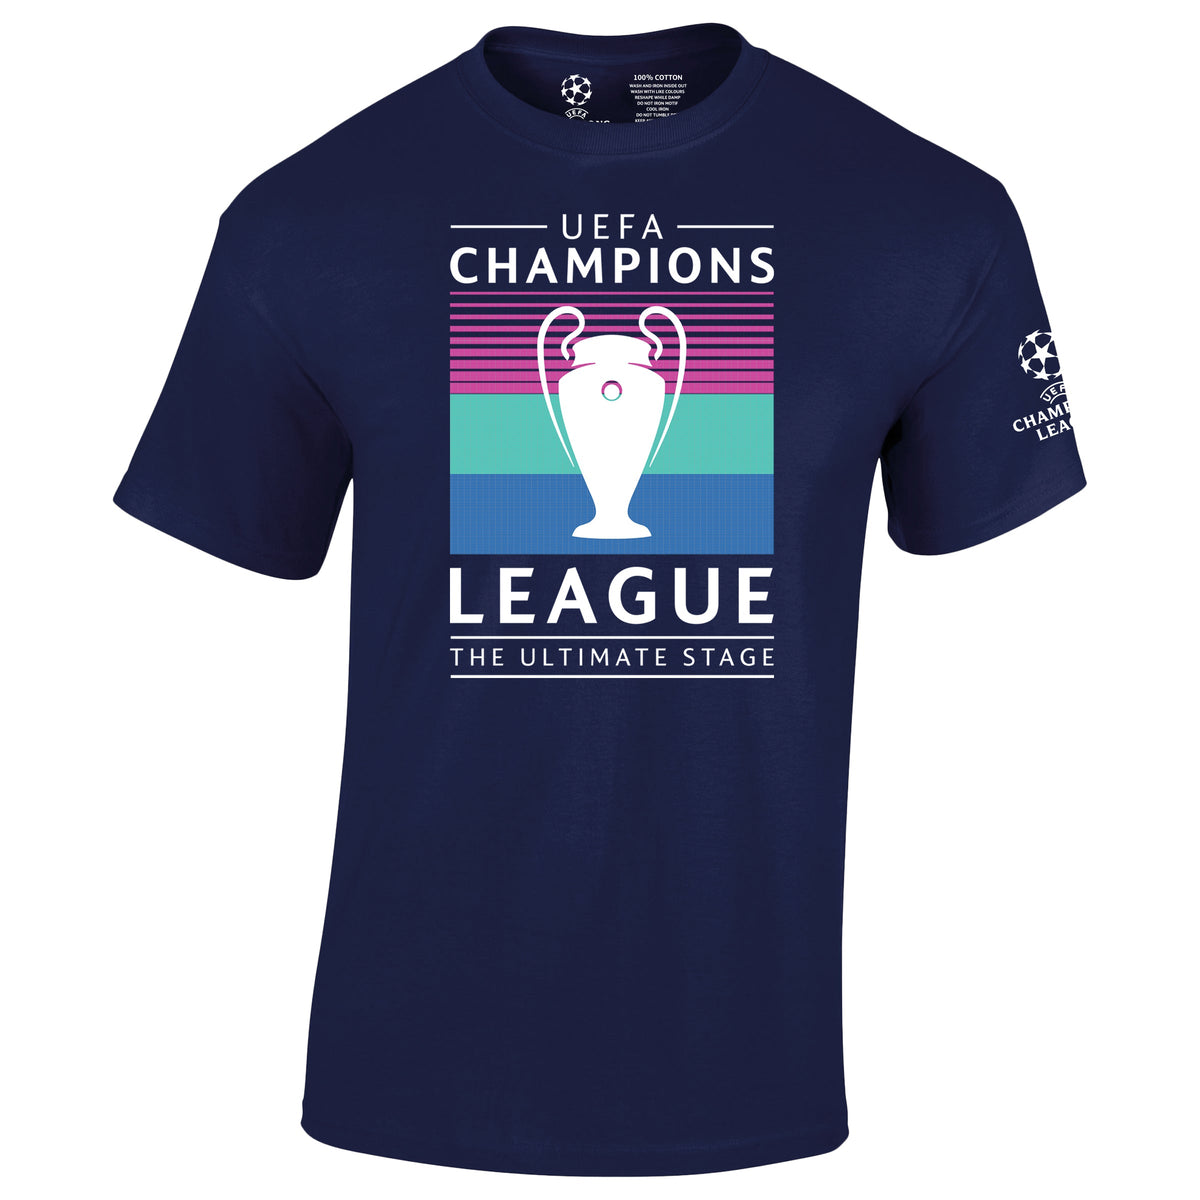 Champions League 'The Ultimate Stage' T-Shirt Navy